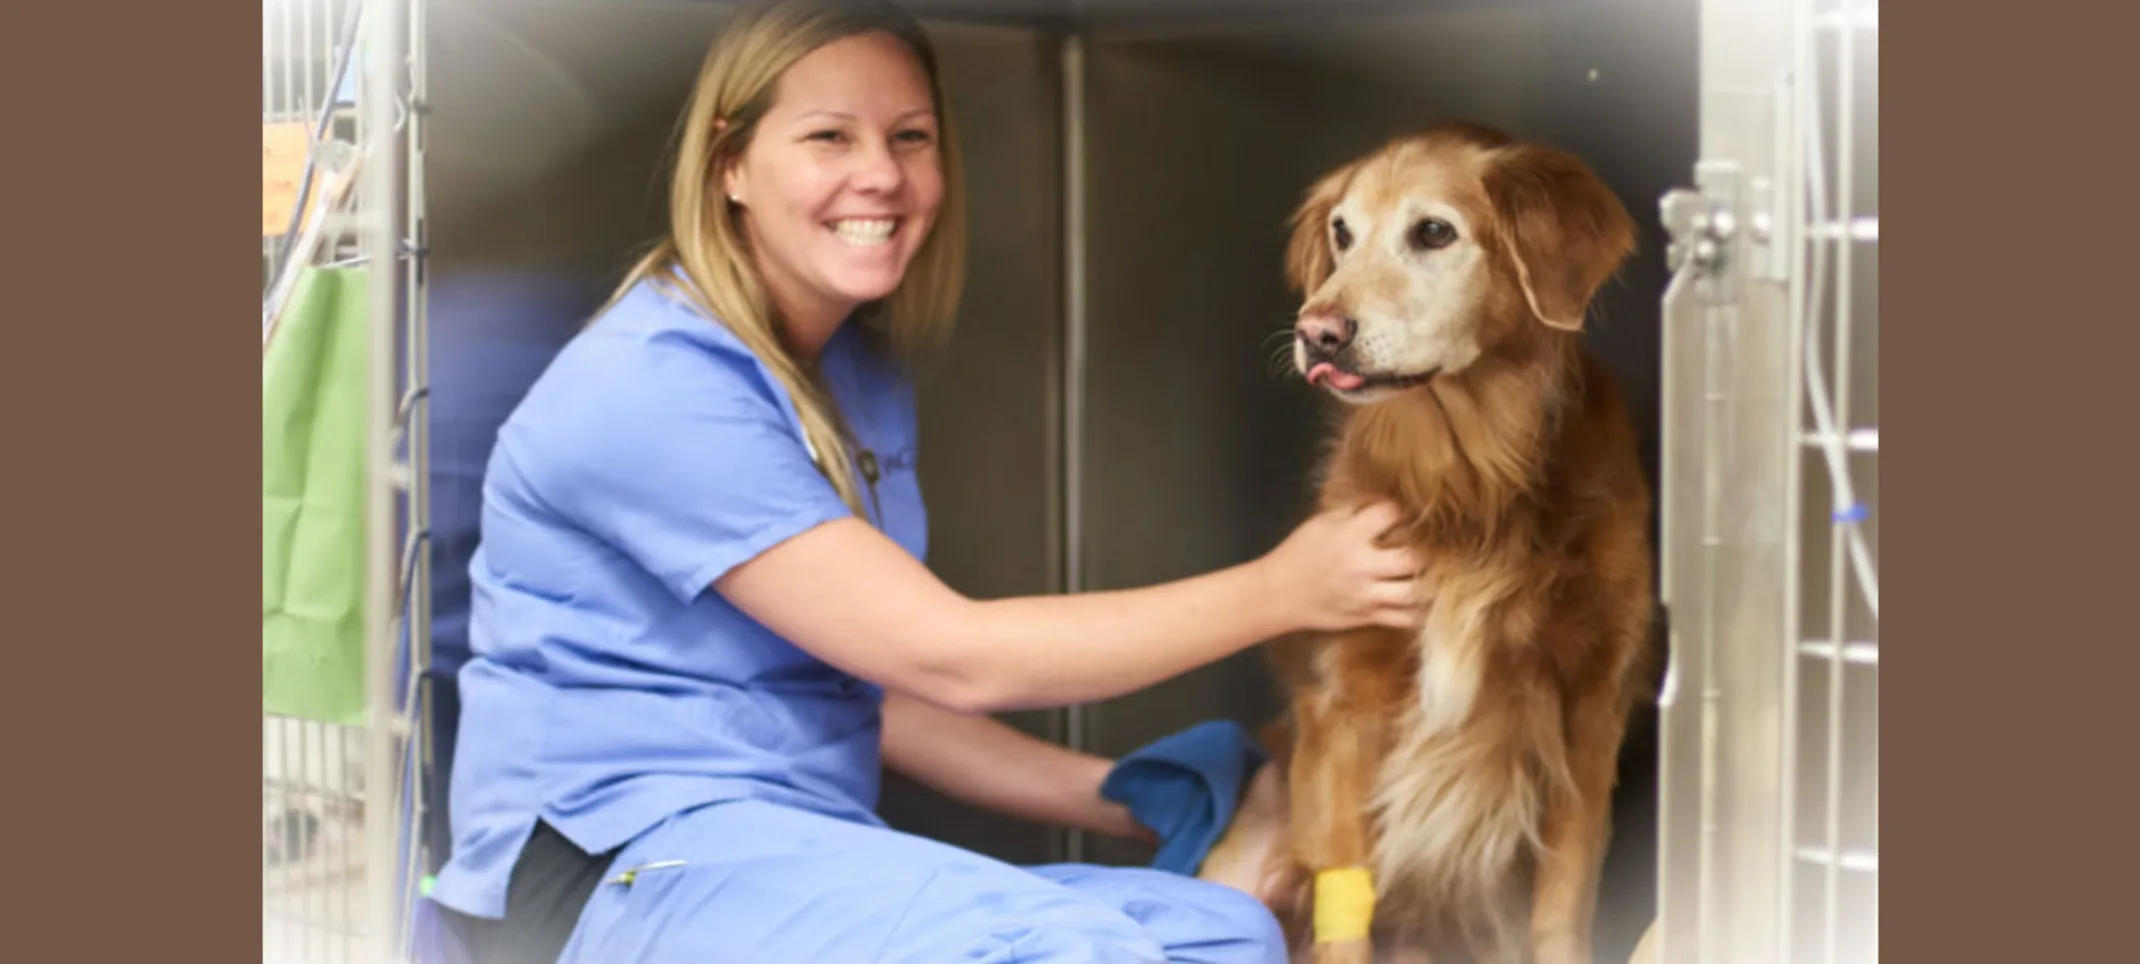 Veterinarian with a brown dog post-examination